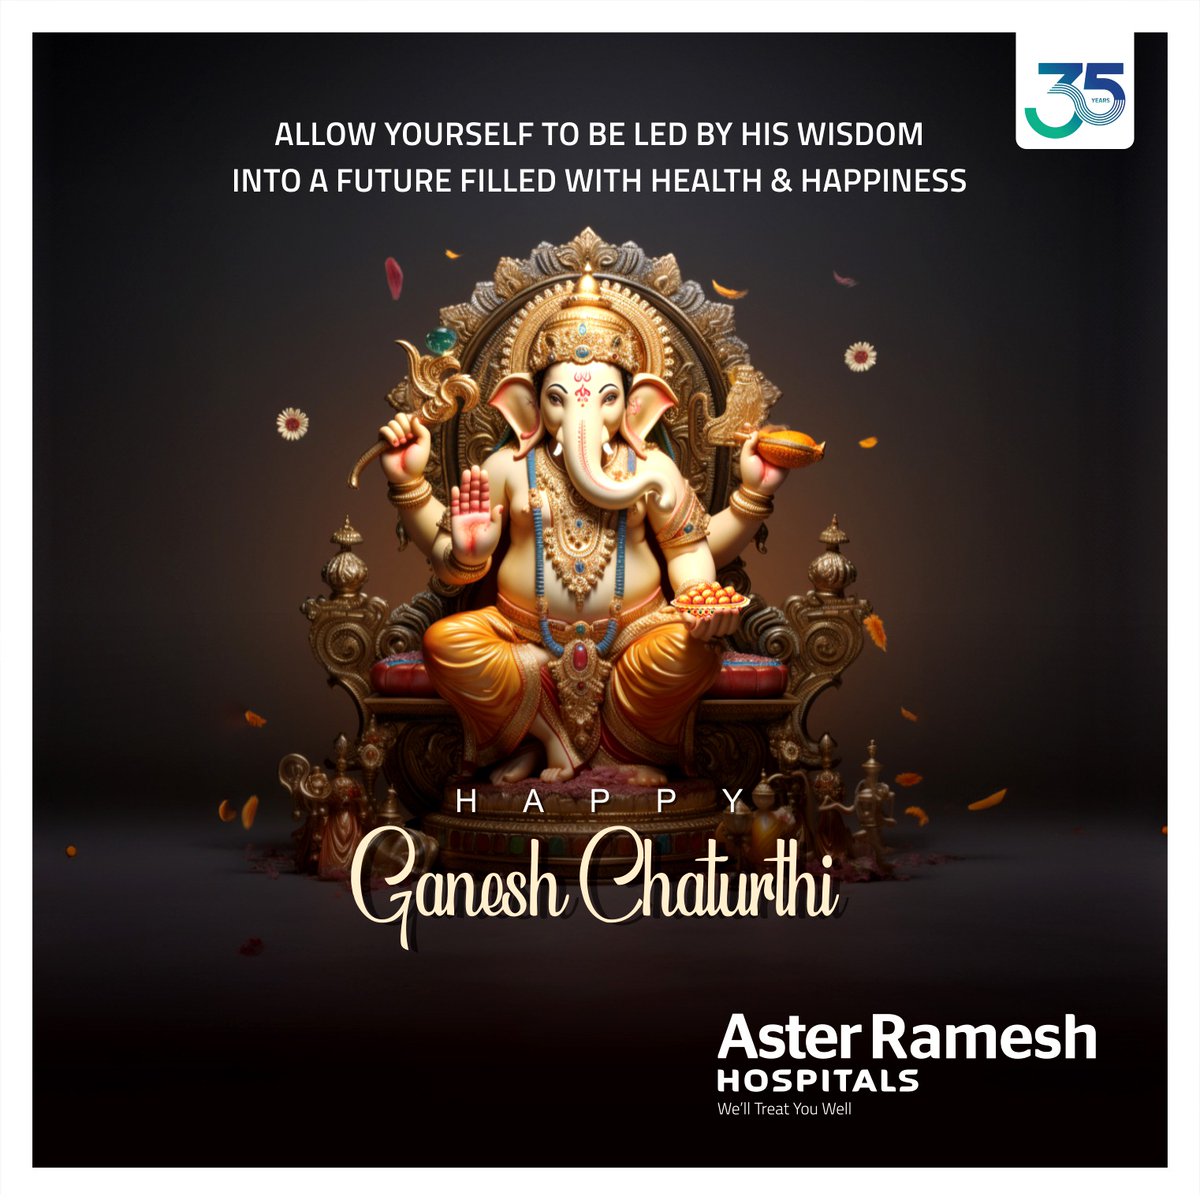 On the auspicious occasion of Ganesh Chaturthi, Aster Ramesh wishes you an obstacle-free path to a prosperous and fulfilling life.

#asterrameshhospitals #AsterHospitals #HappyGaneshChaturthi #ganeshchaturthi #vinayakachavithi #traditional #healthcare